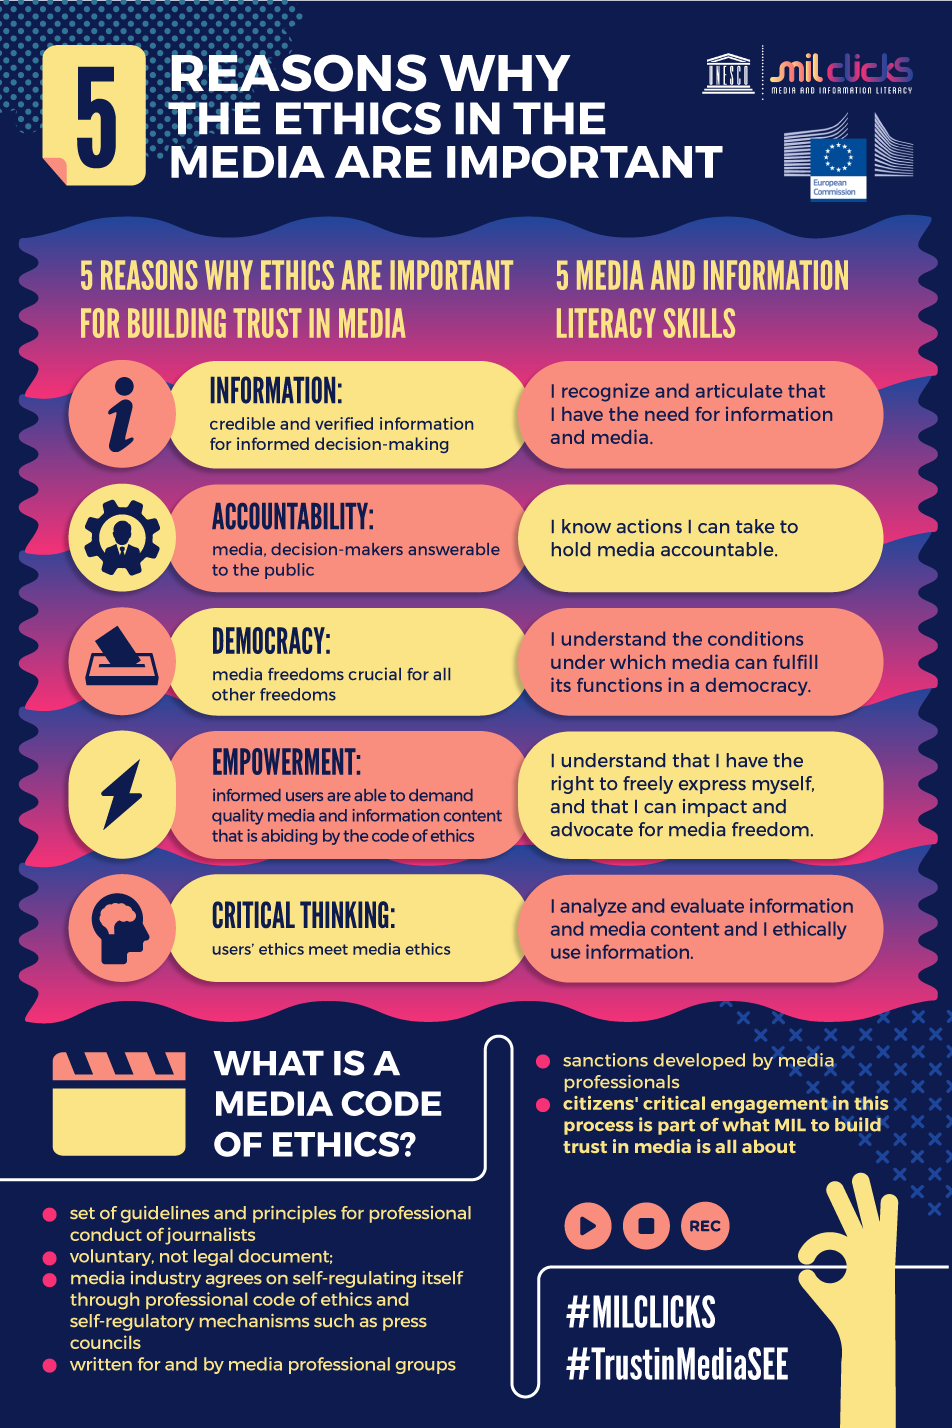 What are the 5 media ethics?